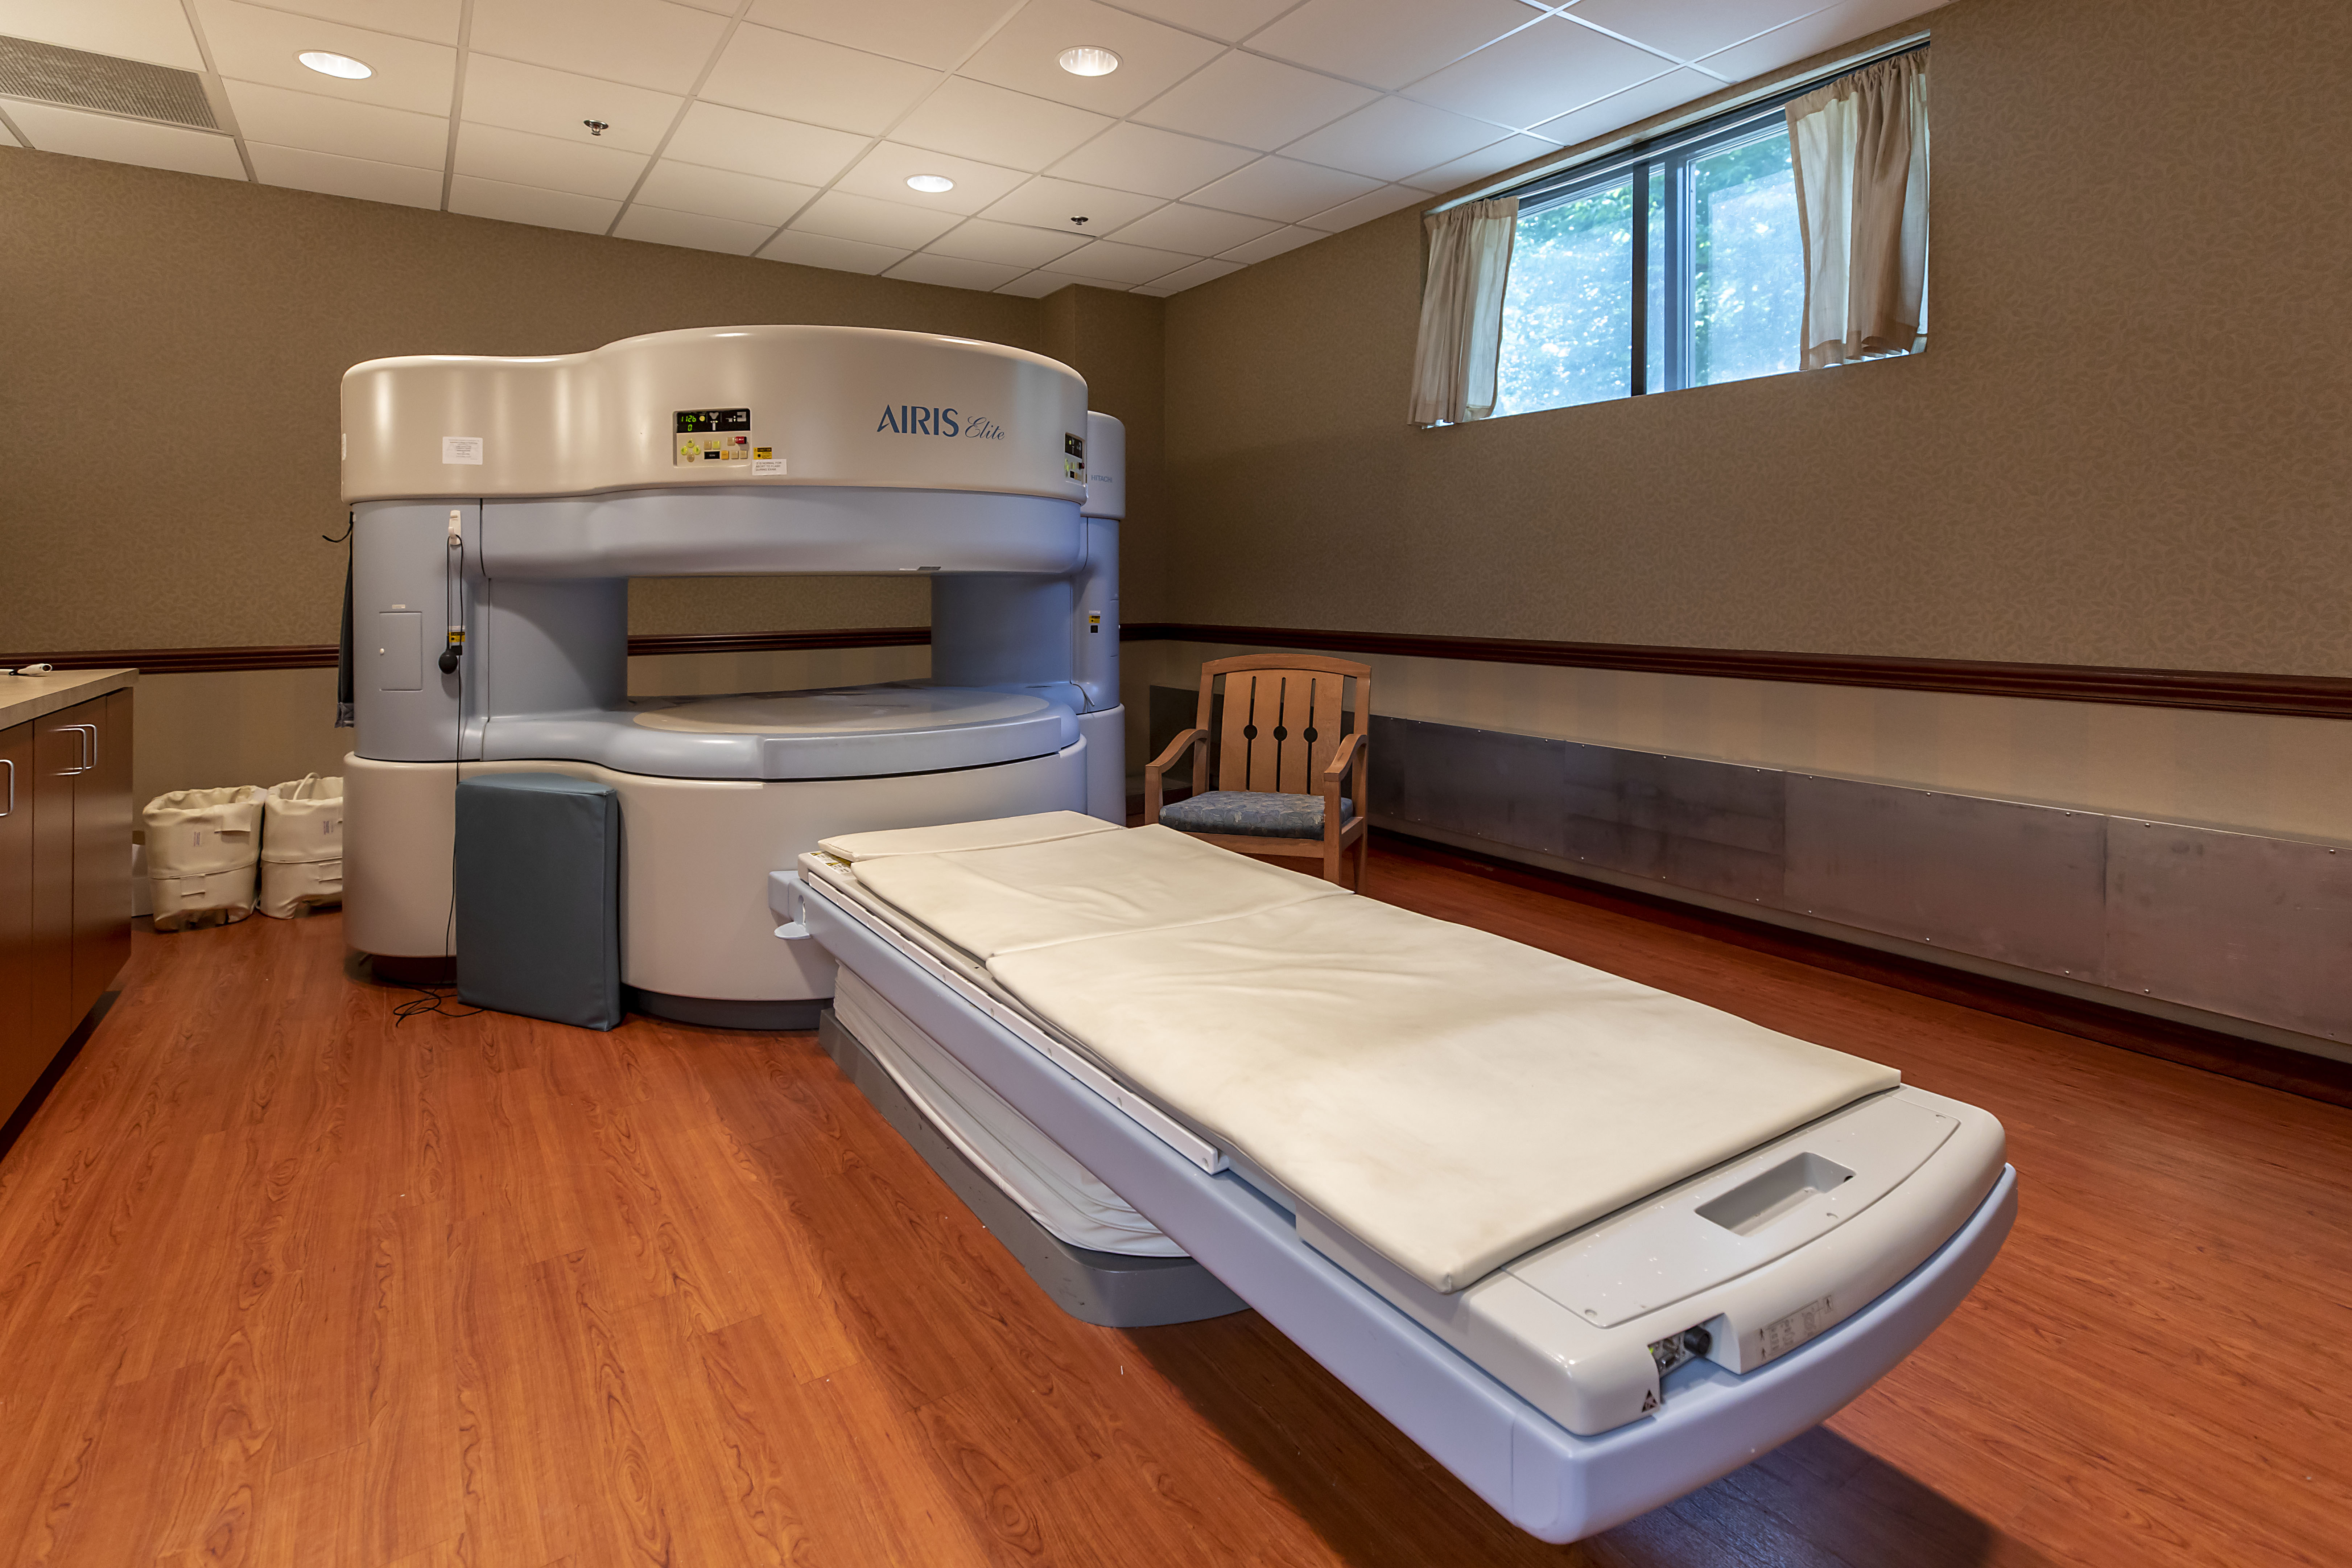 Premier Imaging Center, where Onsite radiologists, experienced